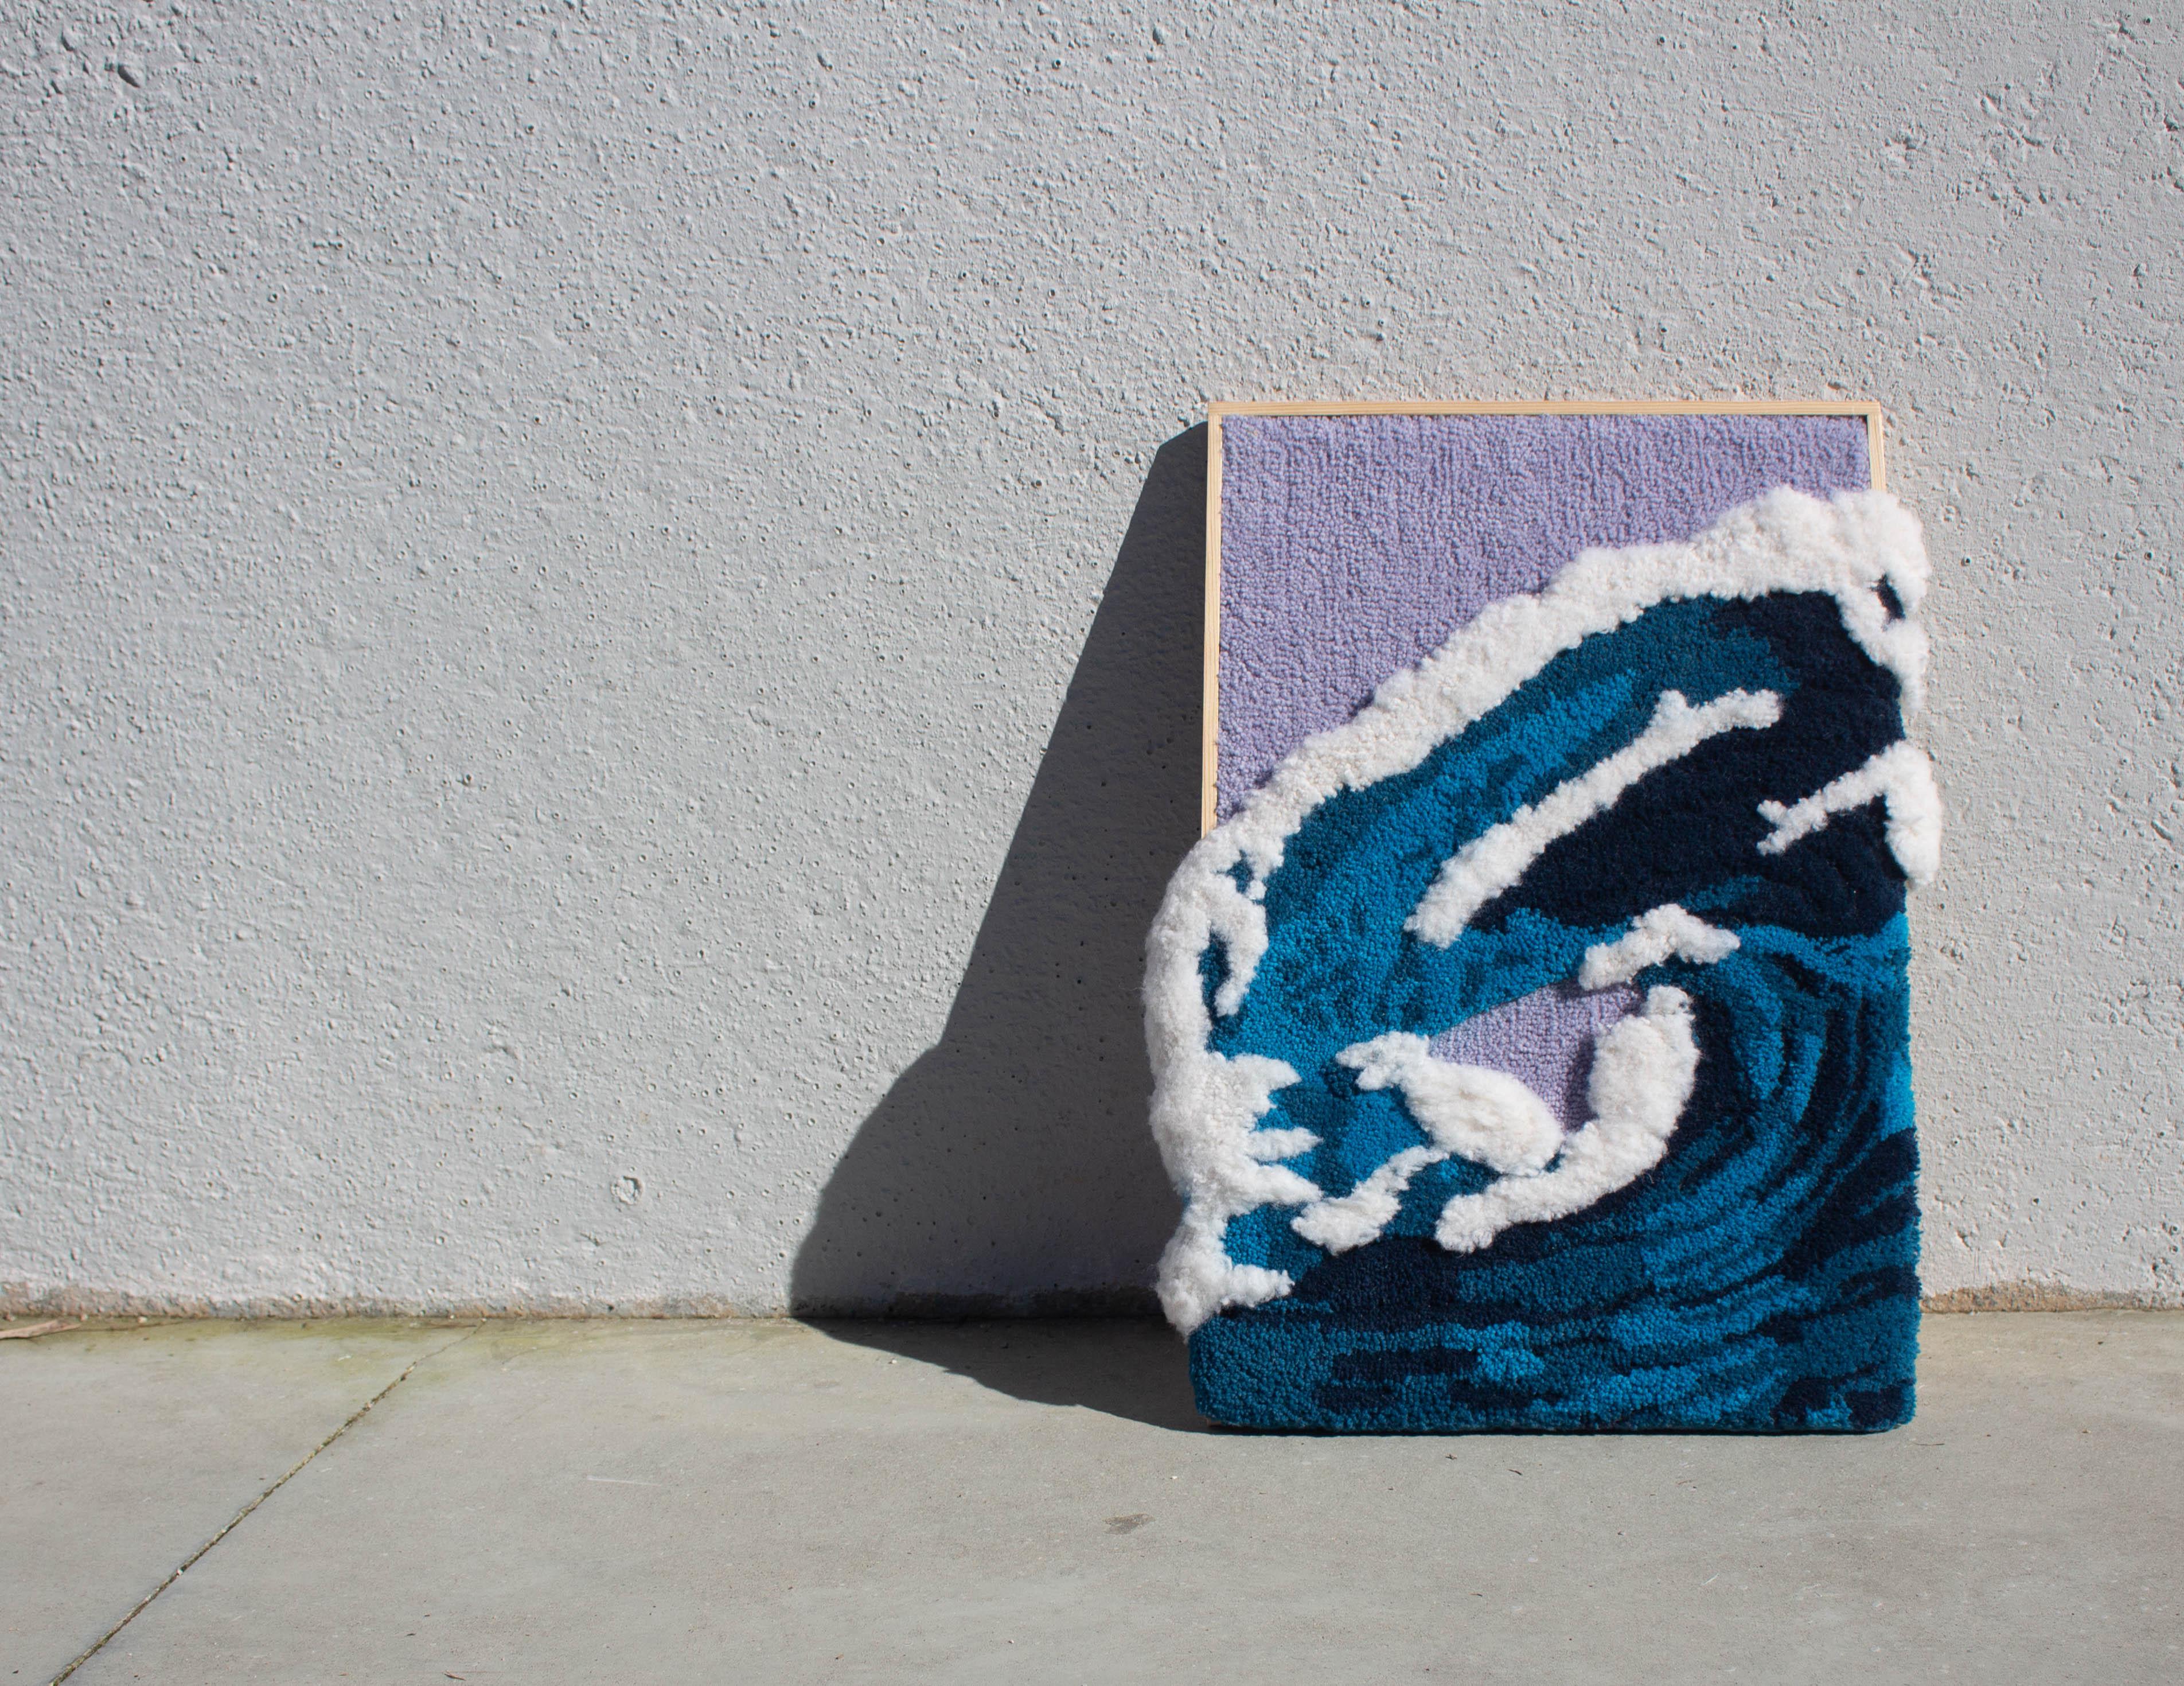 SEAMOTION Tapestry is handmade with 100% Portuguese wool yarn with anti-moth treatment, using tufting gun, carving and embroidery techniques, on a pine frame designed and produced by the studio. This artwork is Inspired by the sea of beautiful